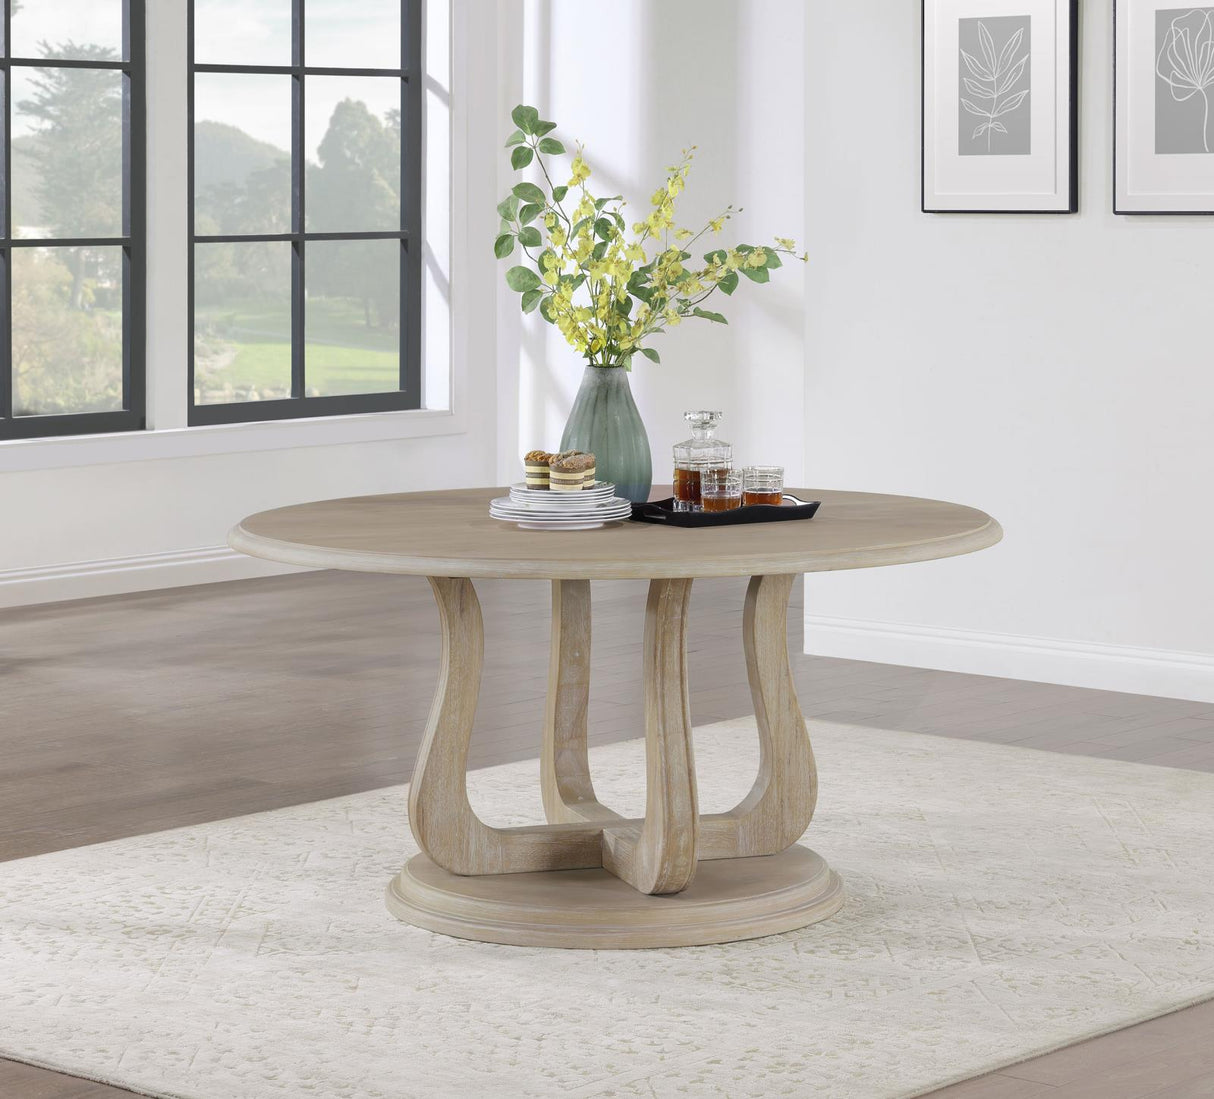 Trofello Round Dining Table with Curved Pedestal Base White Washed - 123120 - Luna Furniture